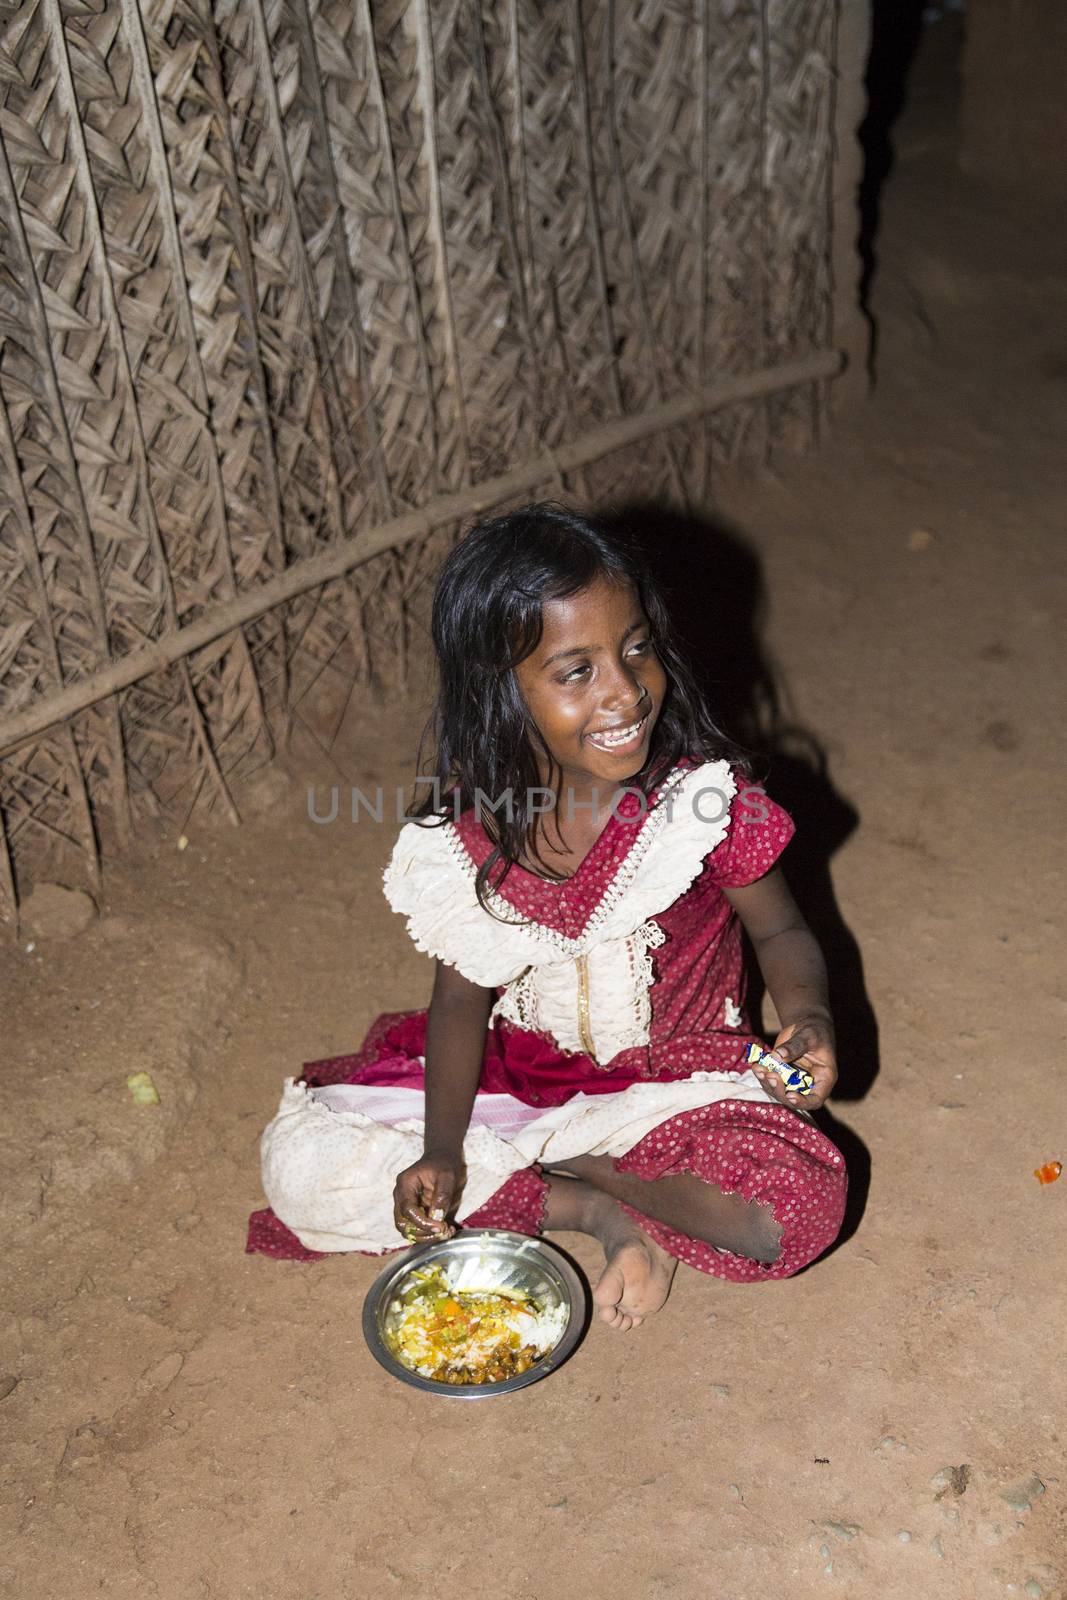 Documentary editorial image. Pondicherry, Tamil Nadu, India - April 24 2014. Very poor young girl sitting in the street, eating on the floor during the night. Poverty